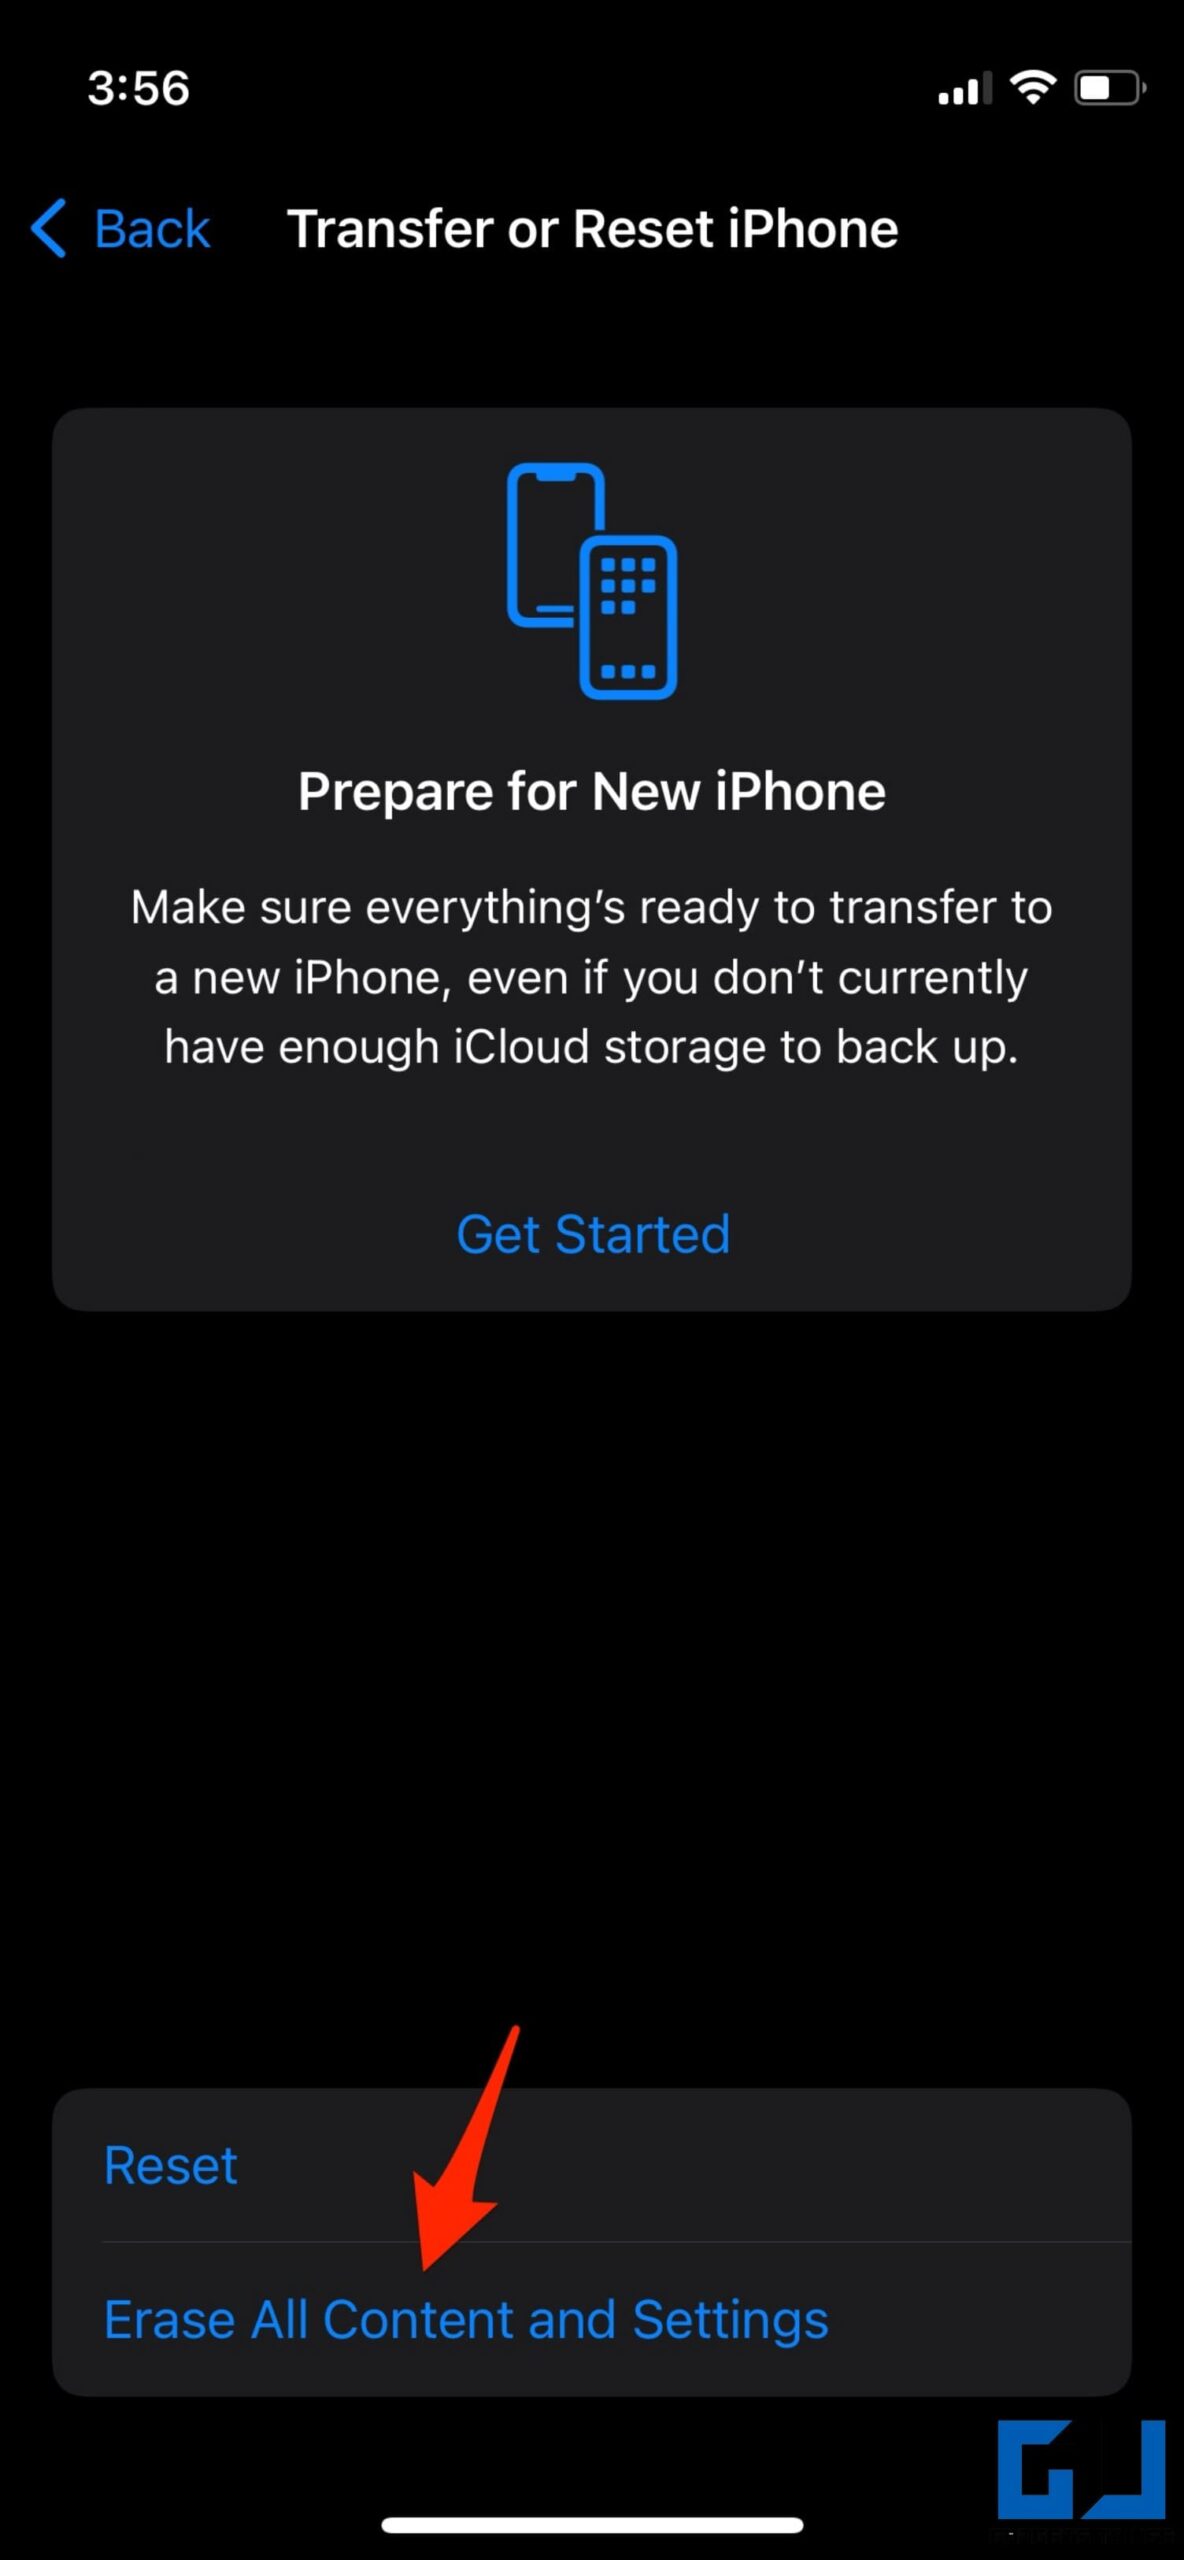 Reset to Fix Problems in Old iPhone